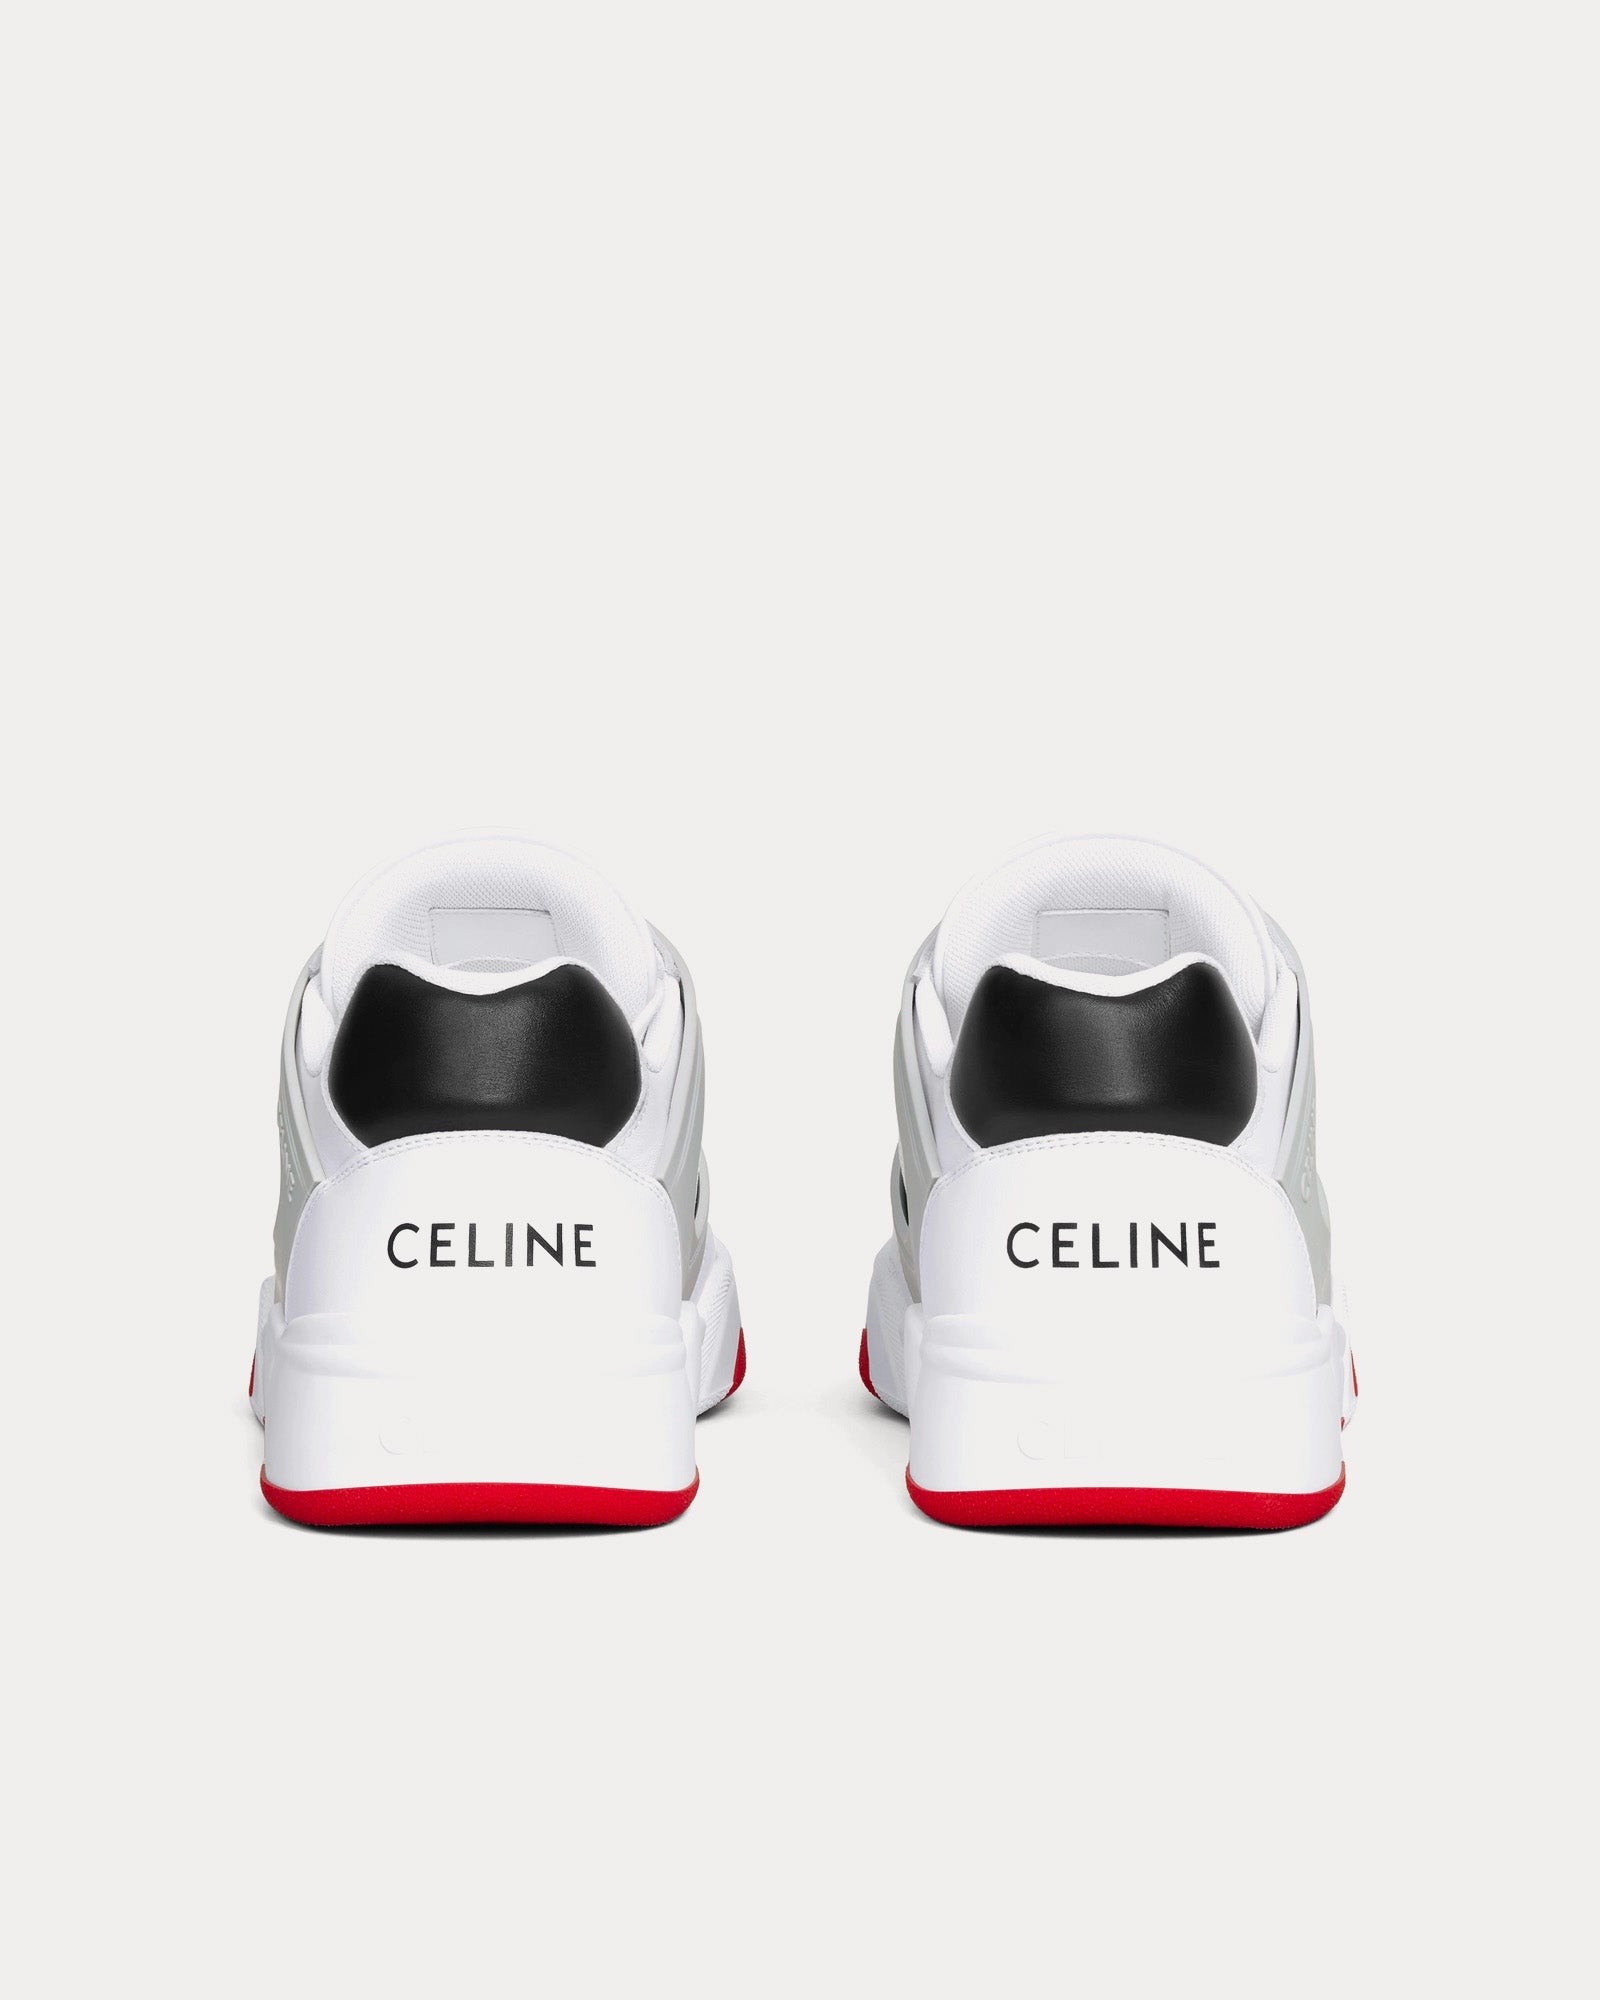 Celine - CT-07 Calfskin Leather Optic White / Grey / Black Low Top Sneakers